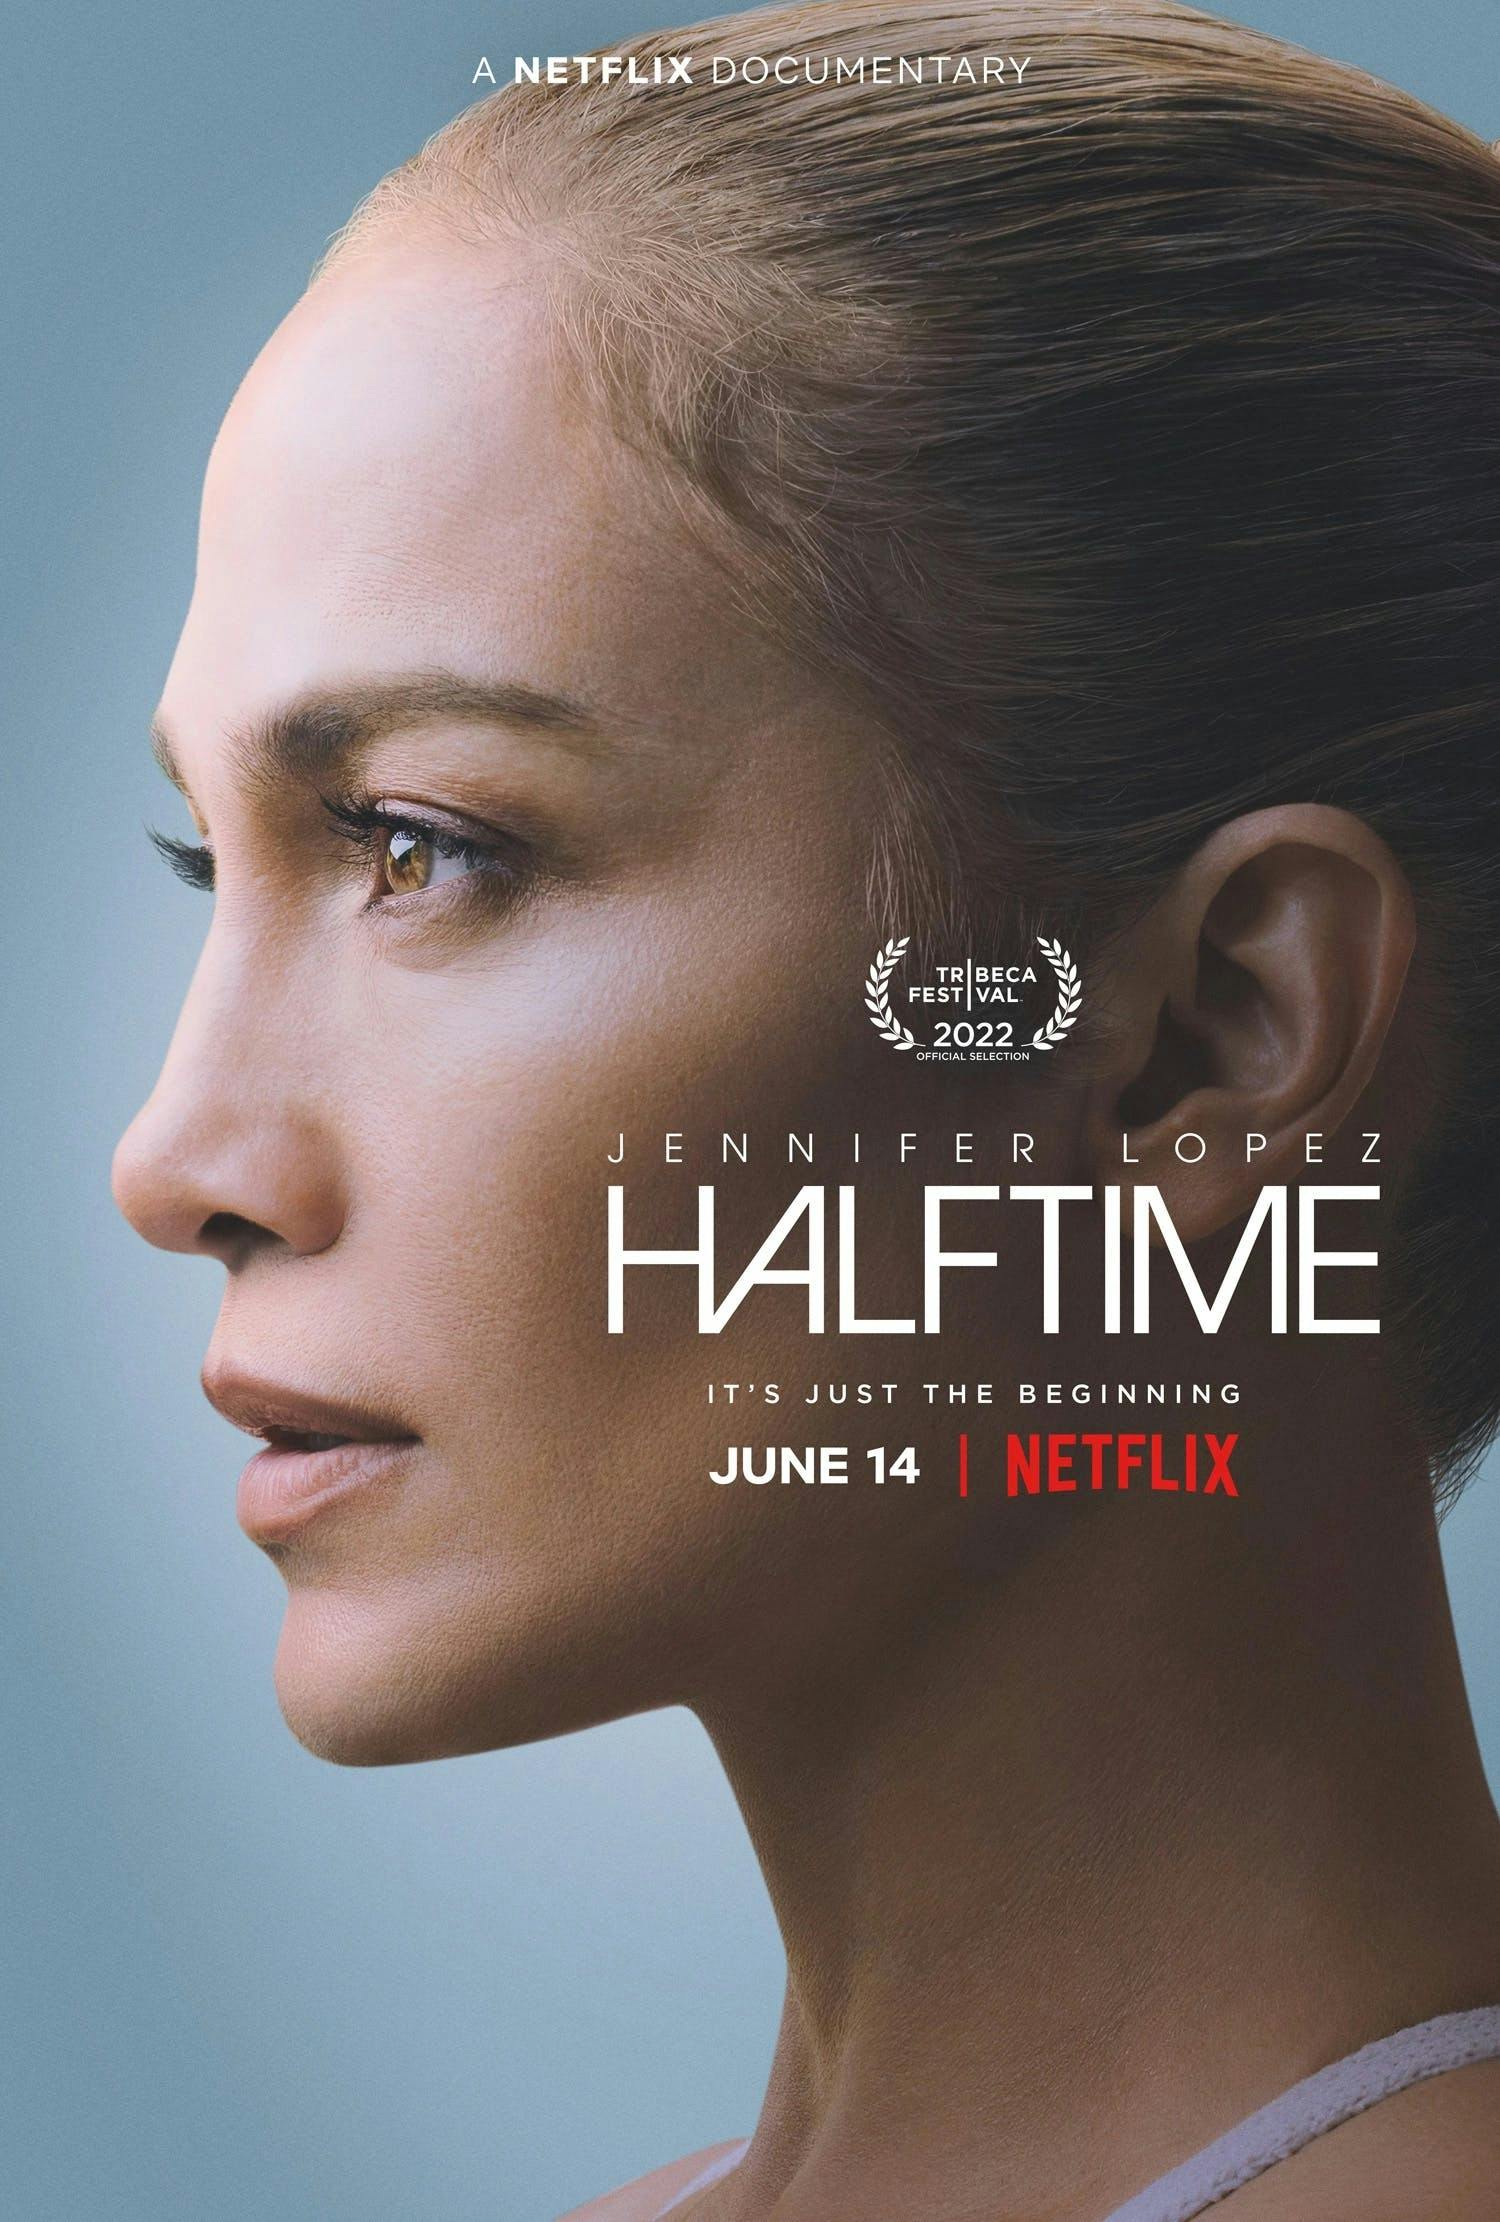 Jennifer Lopez poses in front of blue backdrop for her 'Halftime' movie poster 